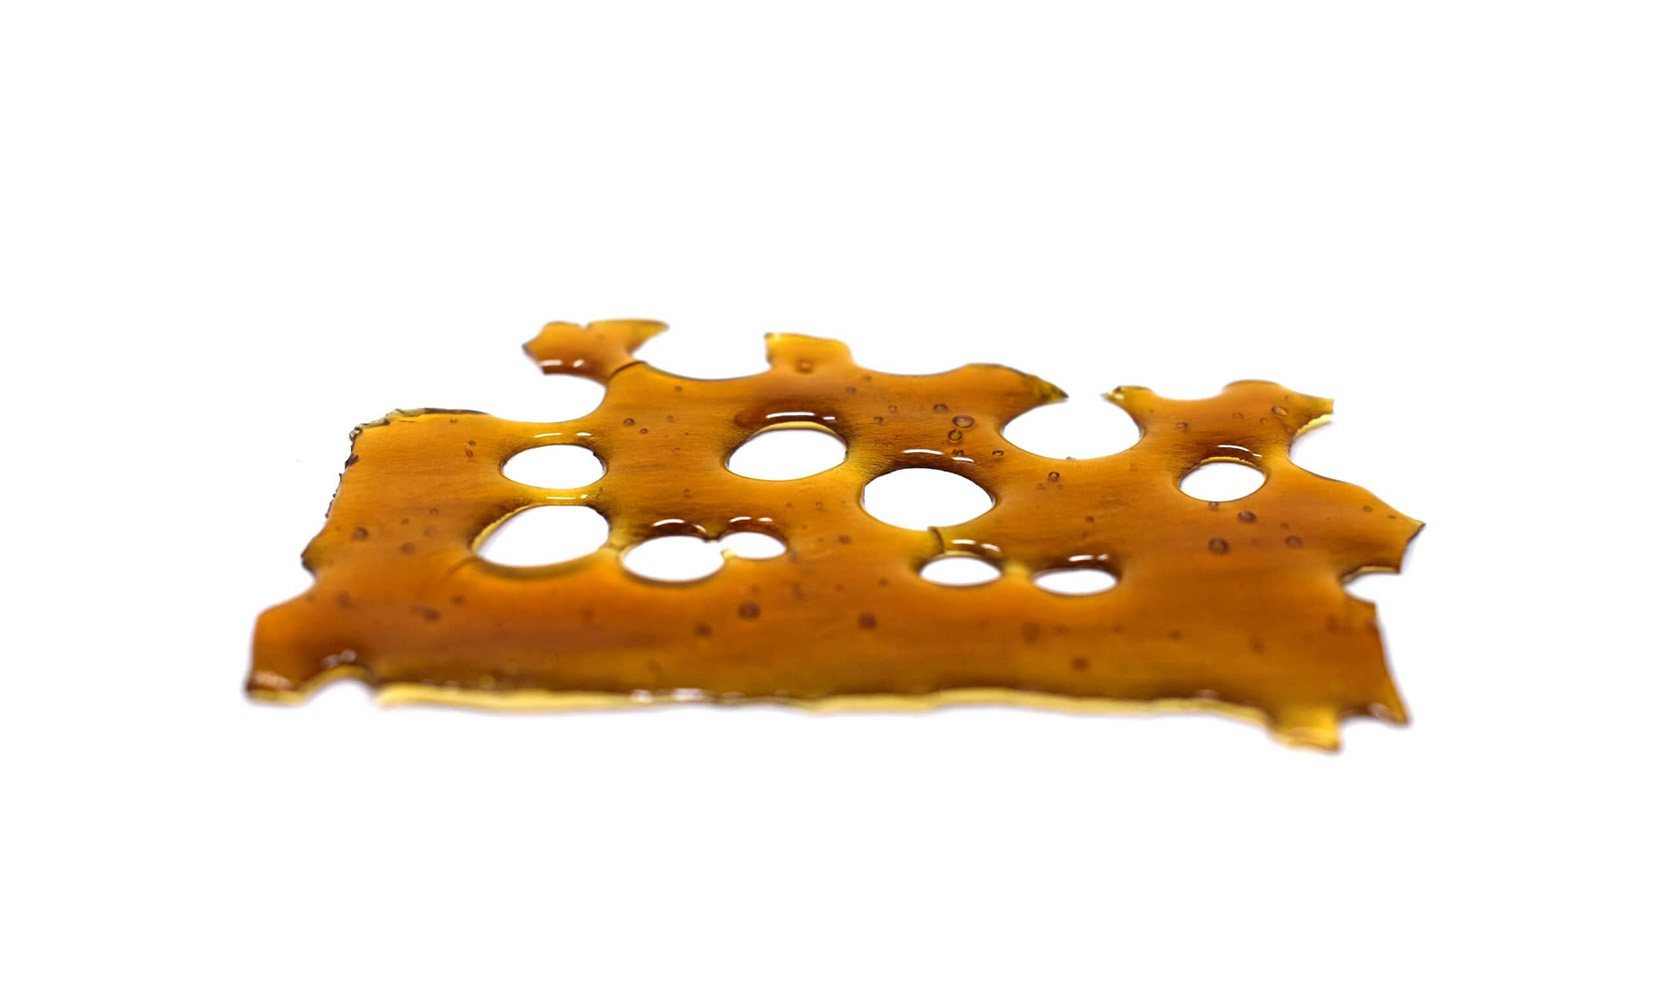 shatter weed for sale from online weed dispensary for cannabis concentrates. is shatter worth it? buy weed online Canada.